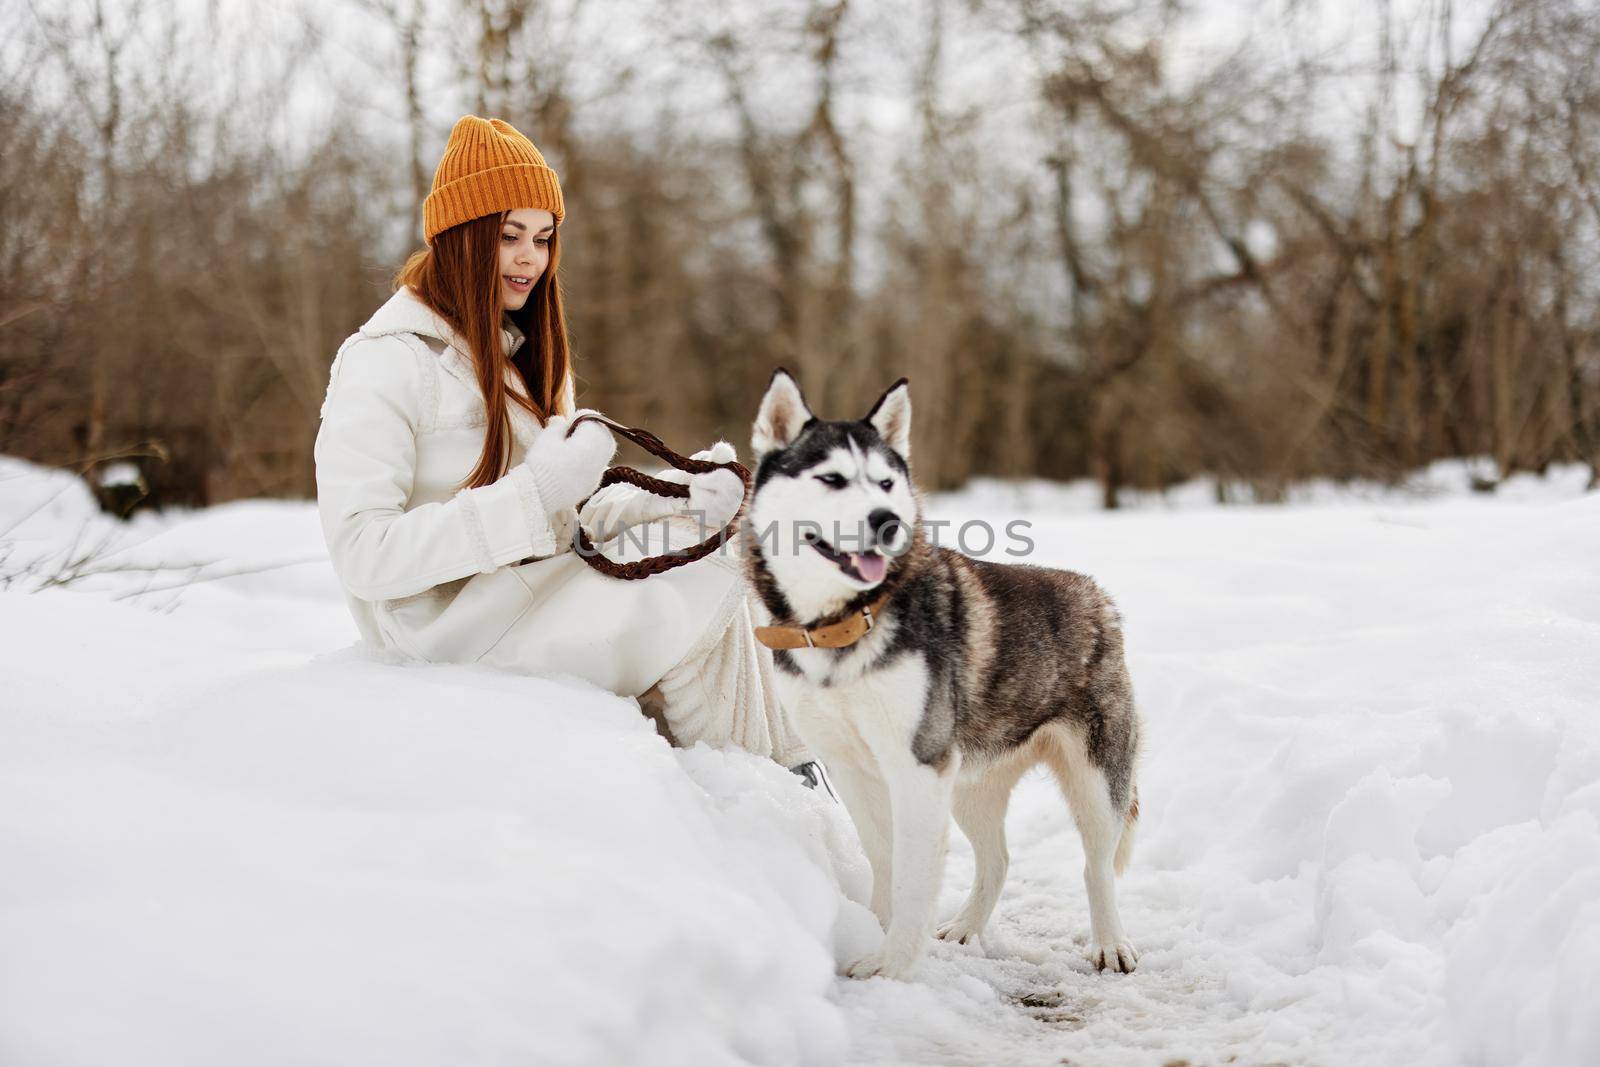 cheerful woman in the snow playing with a dog fun friendship winter holidays by SHOTPRIME